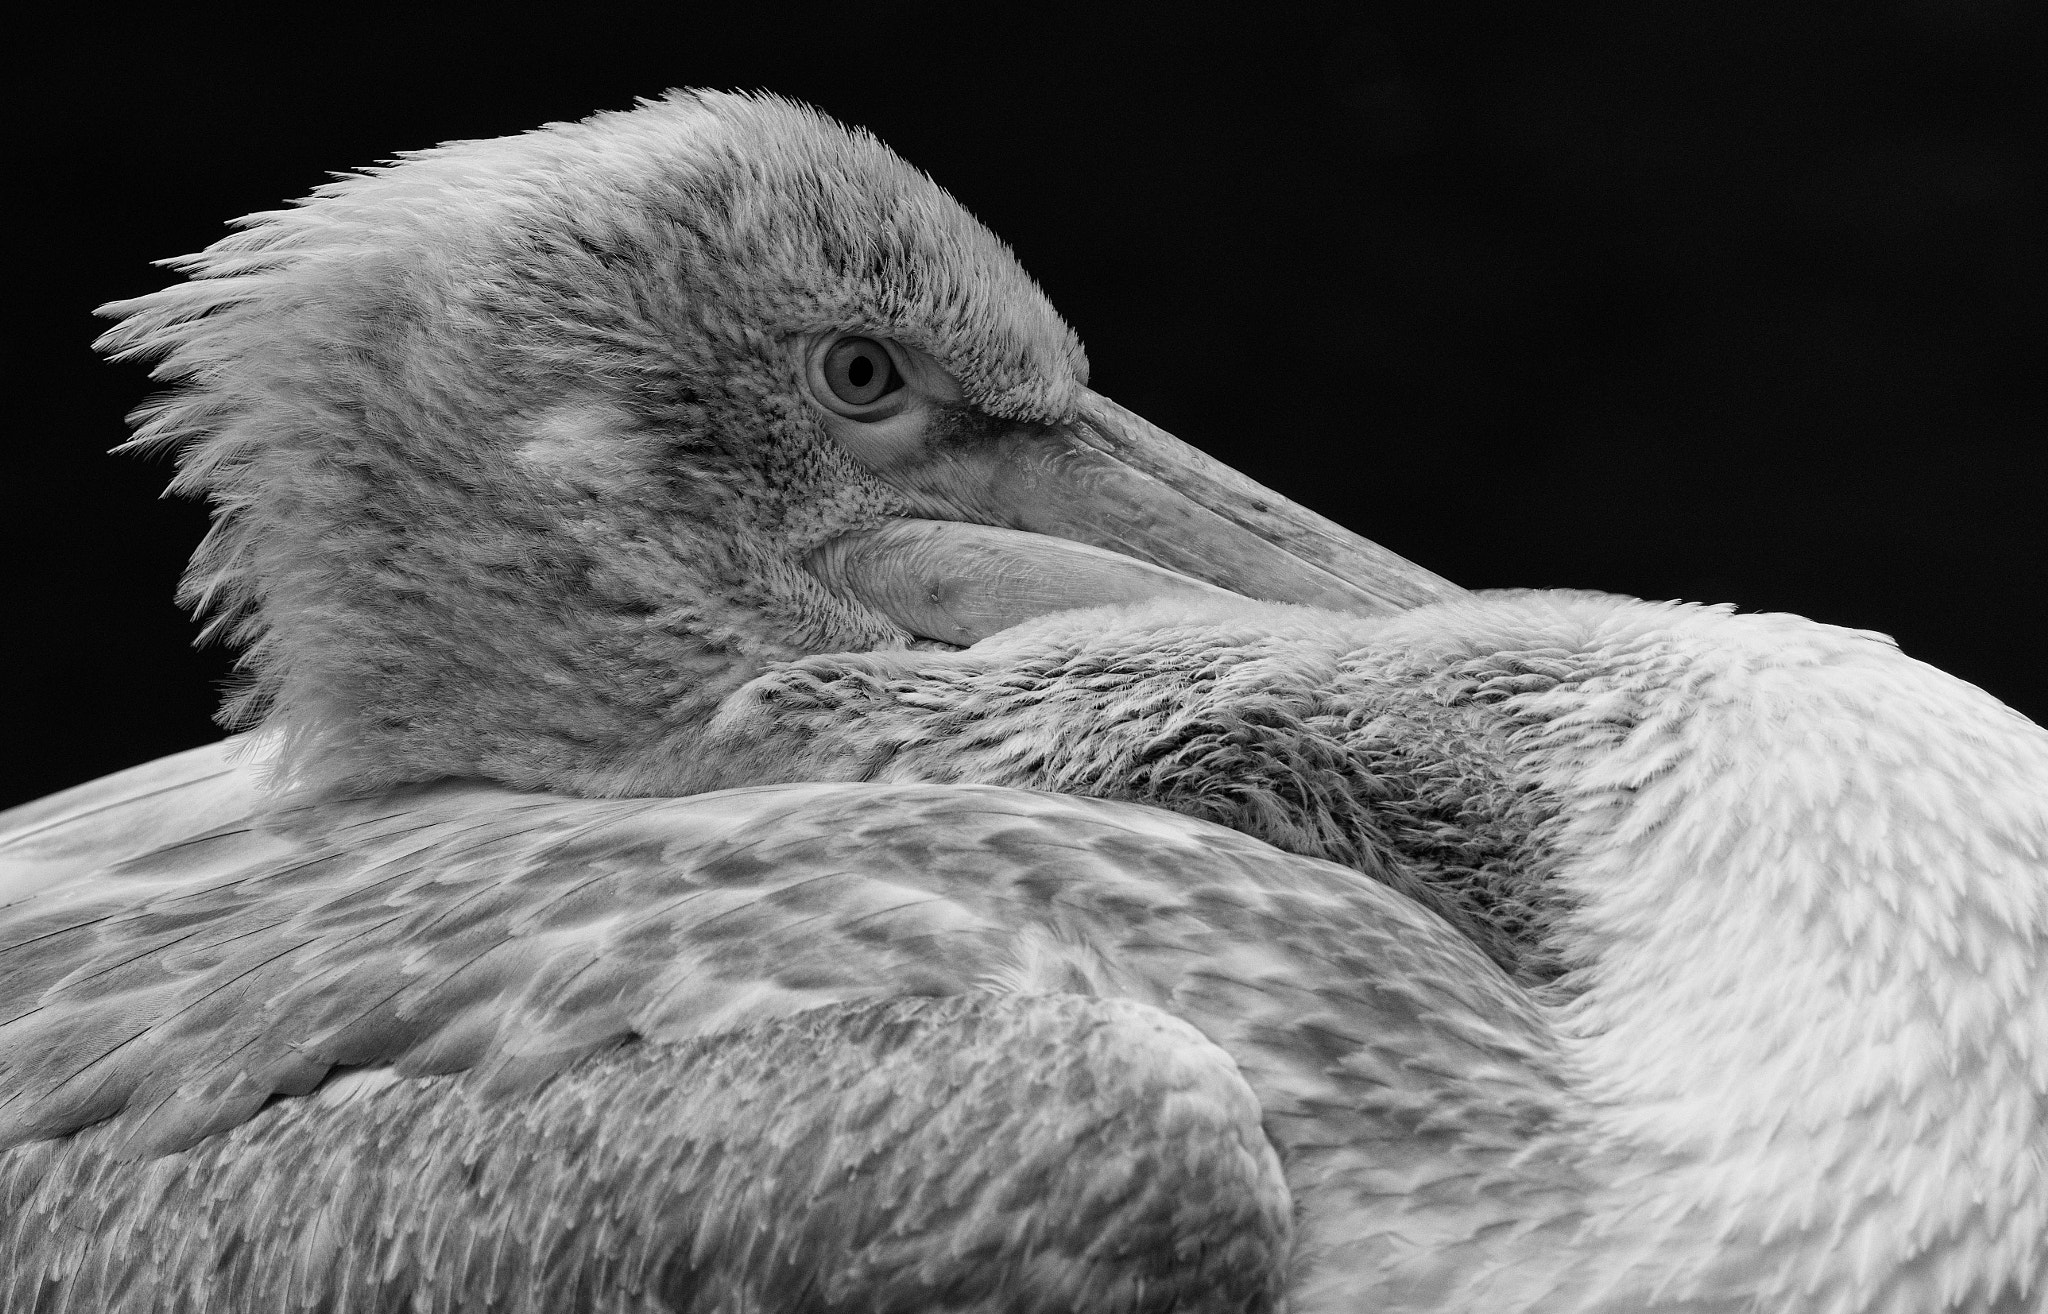 Pentax K-3 II sample photo. Pelican in black and white photography